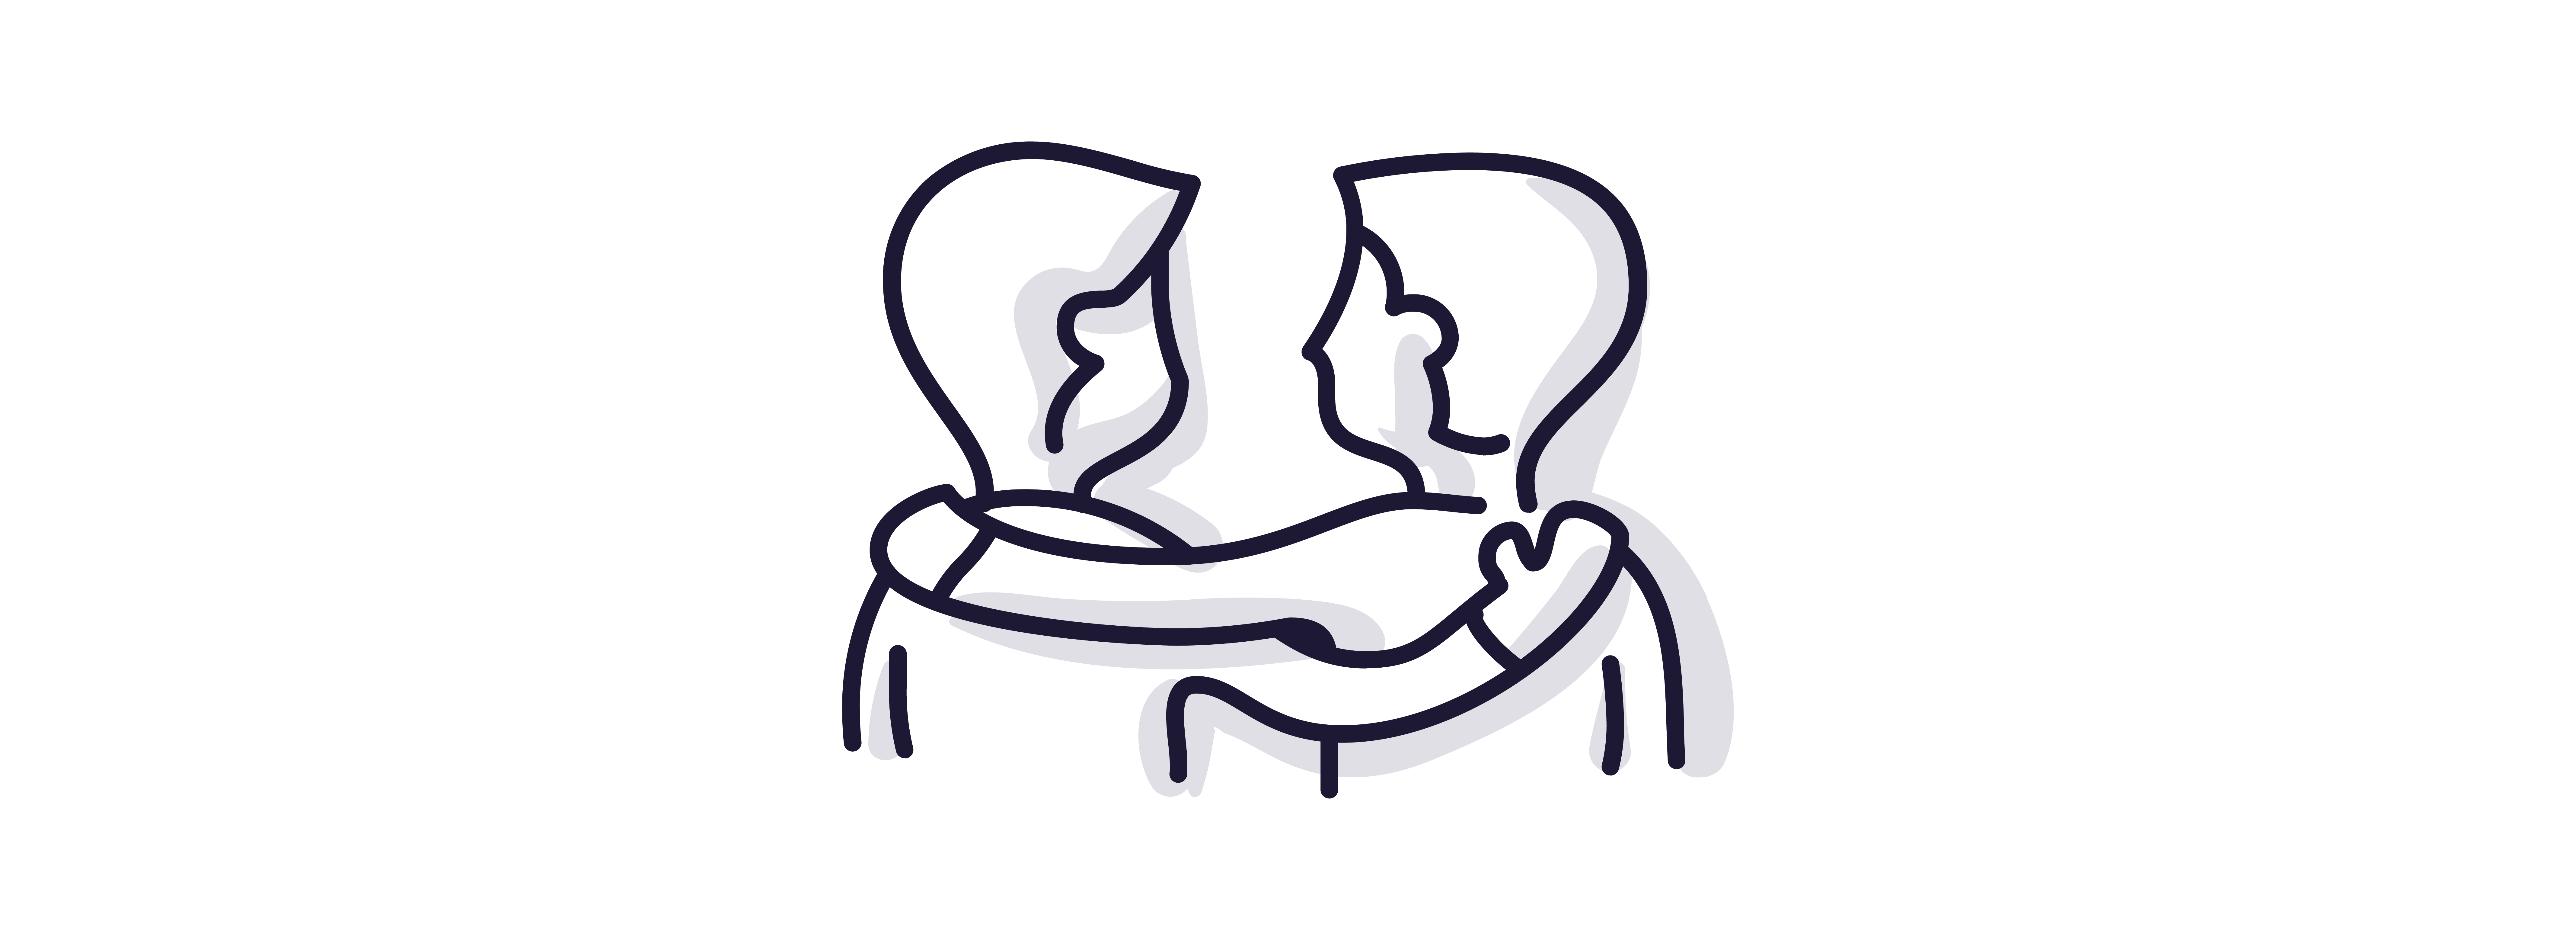 Cartoon drawing of two people embracing from behind